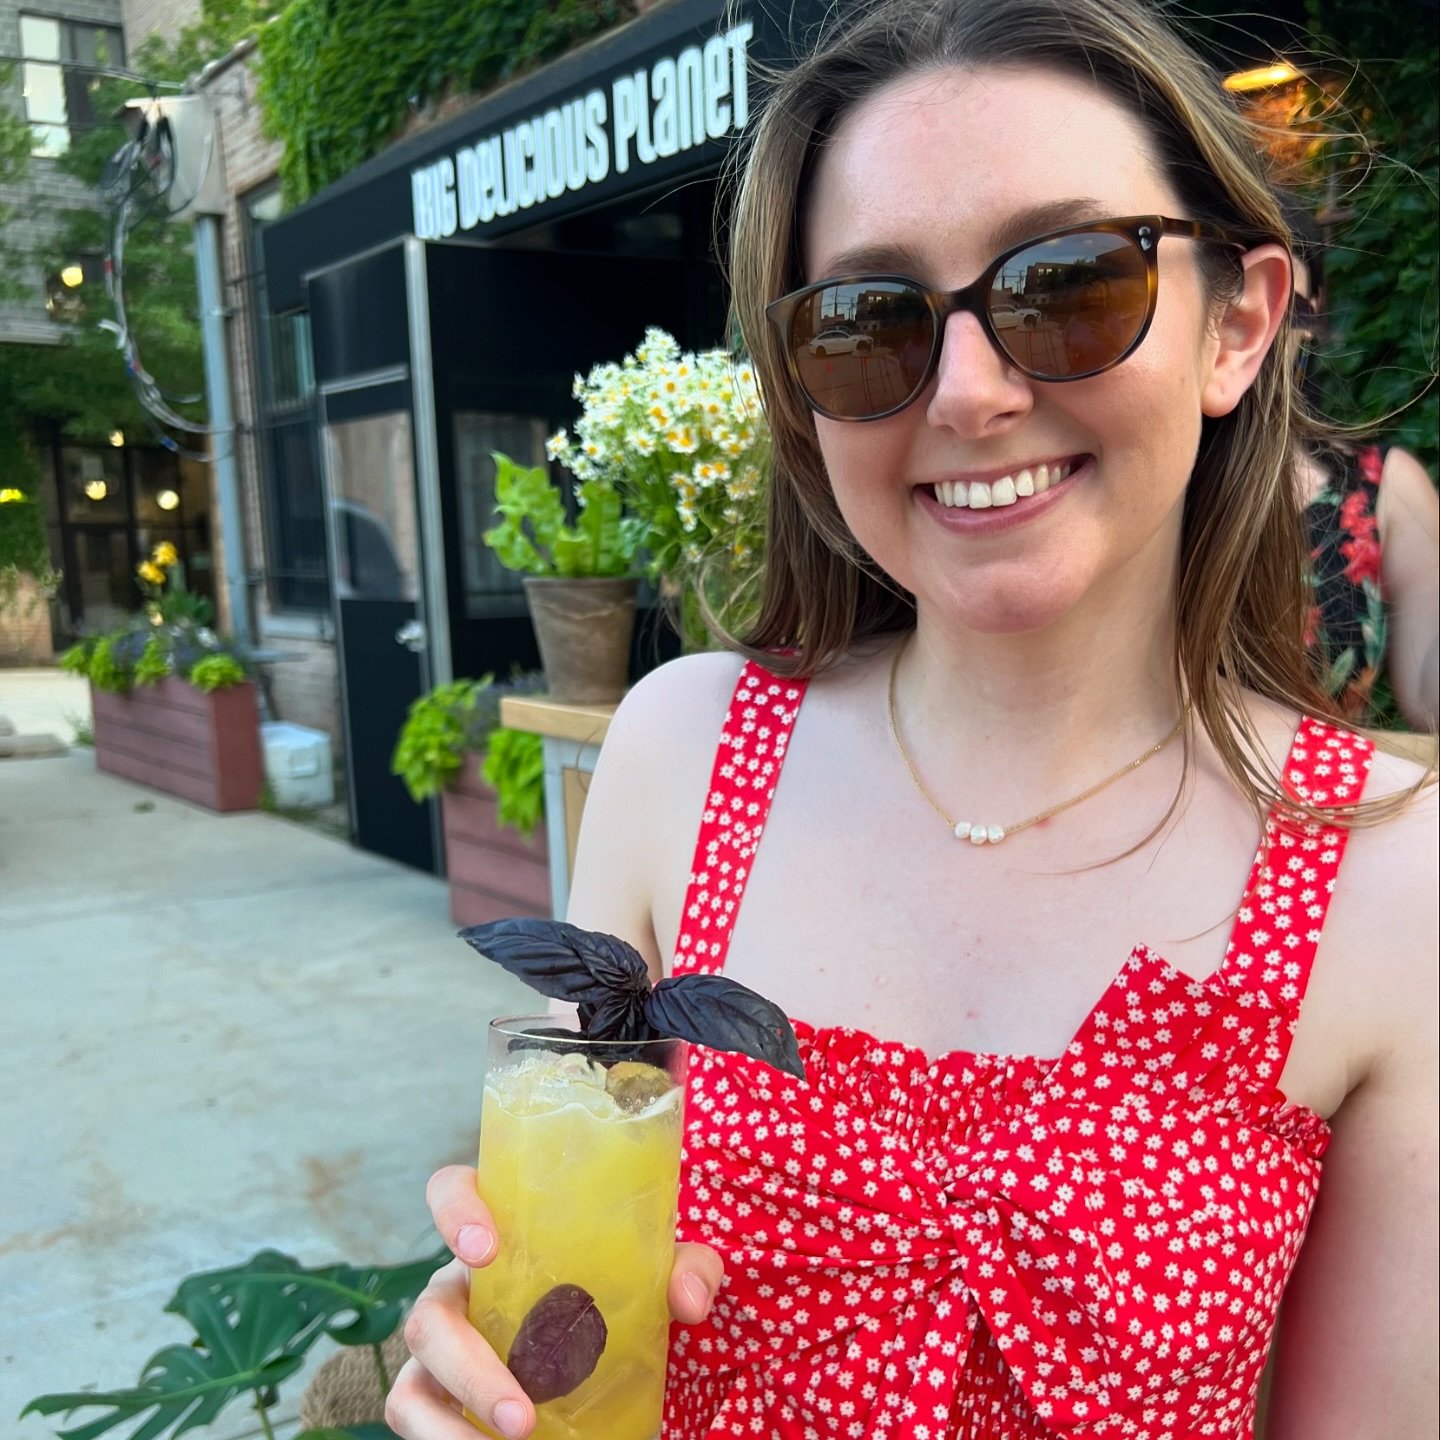 Today we bid farewell to Lauren Skillen-Varley, our outstanding Social Media/Marketing Manager! 😭 For the past two years and nine months, Lauren has been a vibrant member of our team, boosting it with her boundless energy, creativity, and dedication